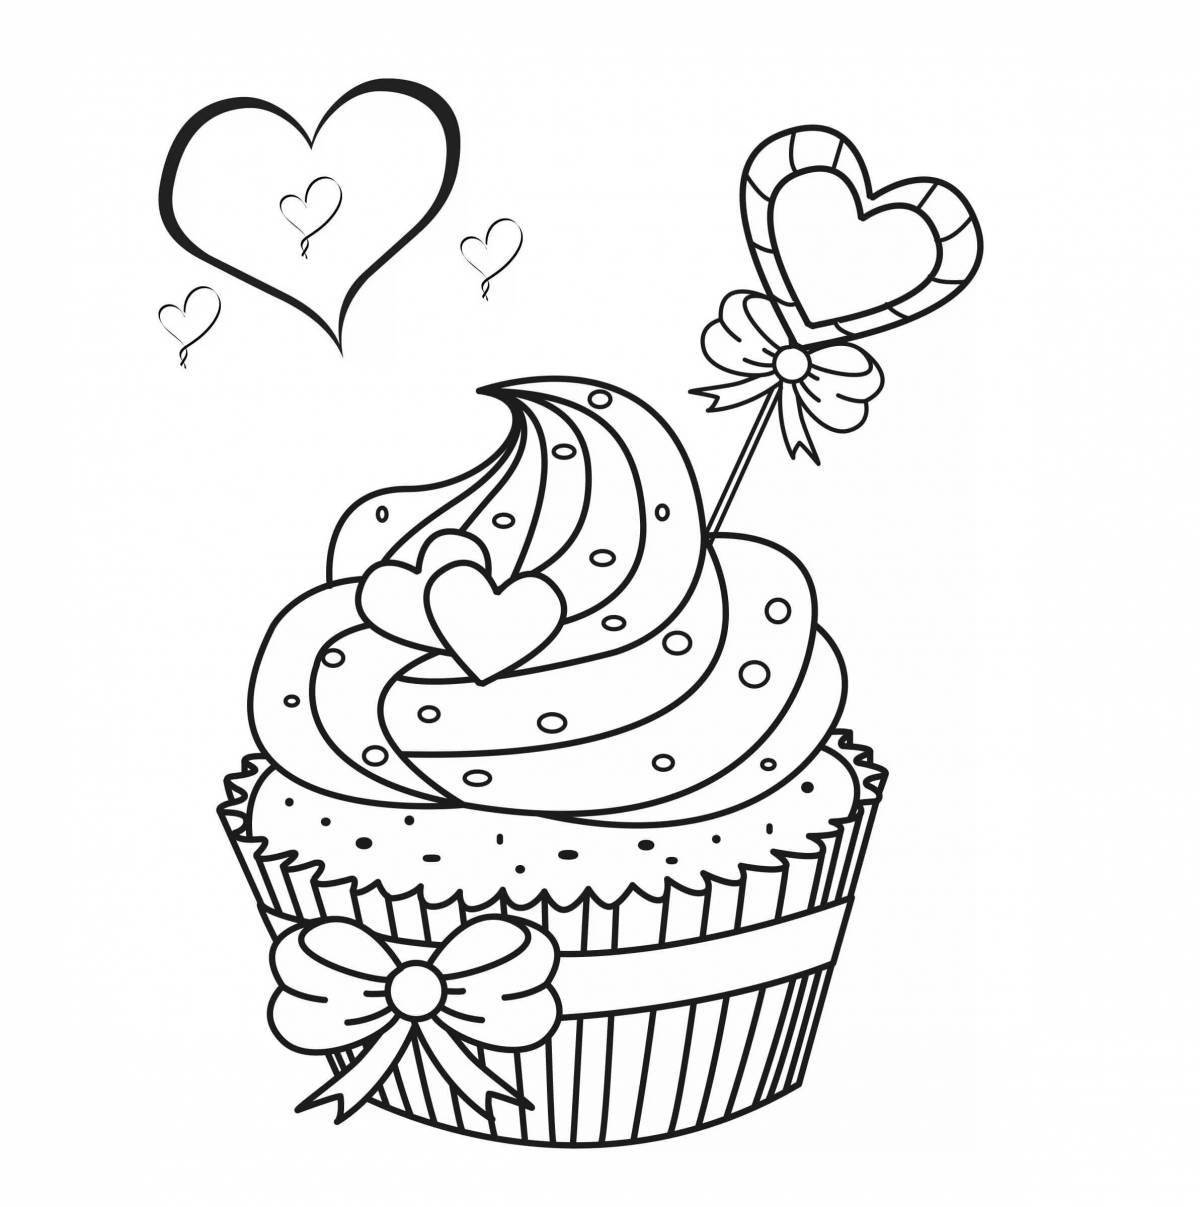 Coloring book sweet cakes for children 5-6 years old